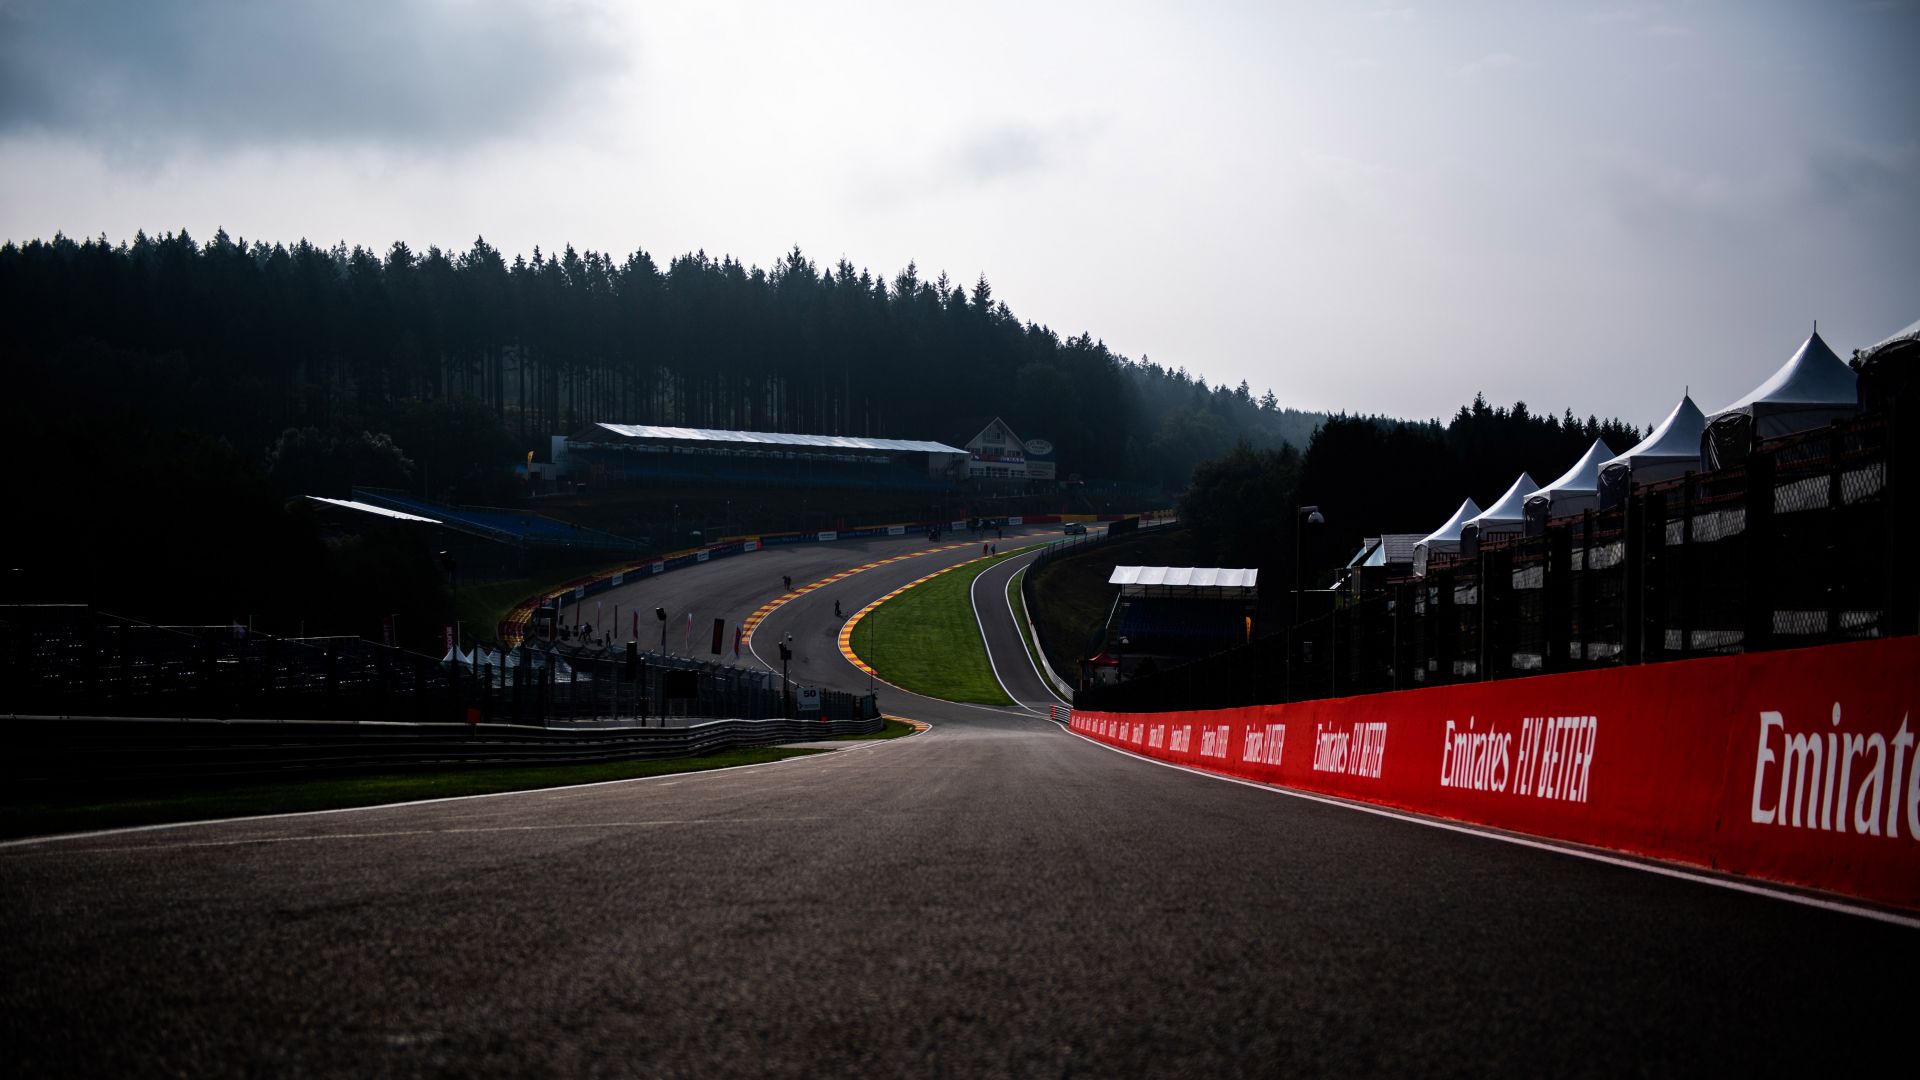 First track. Spa Francorchamps Eau rouge. Spa Francorchamps f1. F1 Spa Francorchamps Eau rouge Lauda. Спа Франкоршам 2022 красная вода.